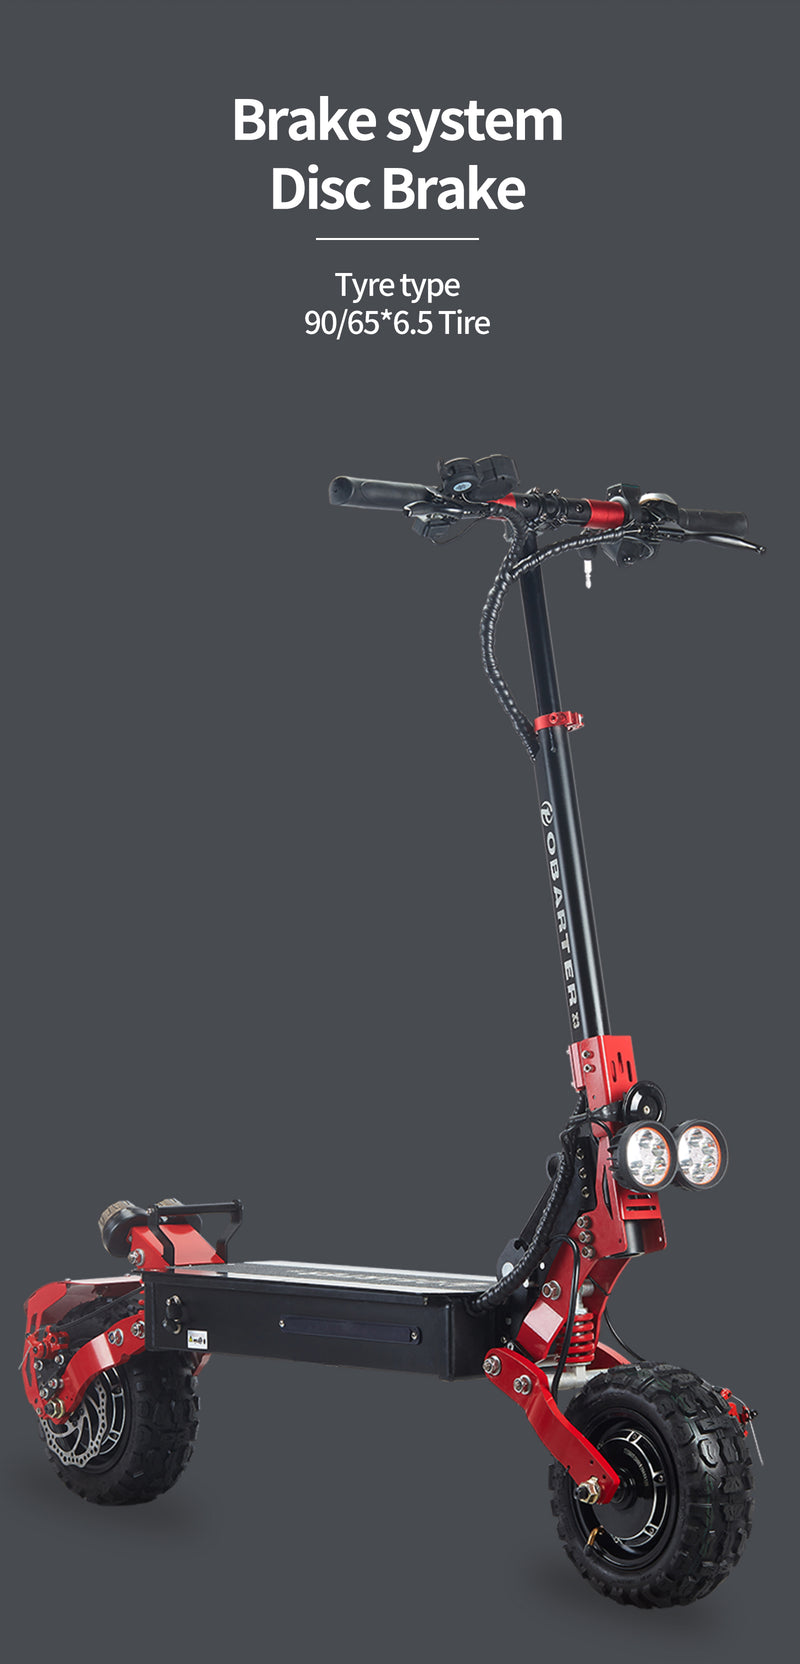 Bild in Galerie-Viewer laden, OBARTER X3 Electric Scooter 2*1200W Cross-Country9
